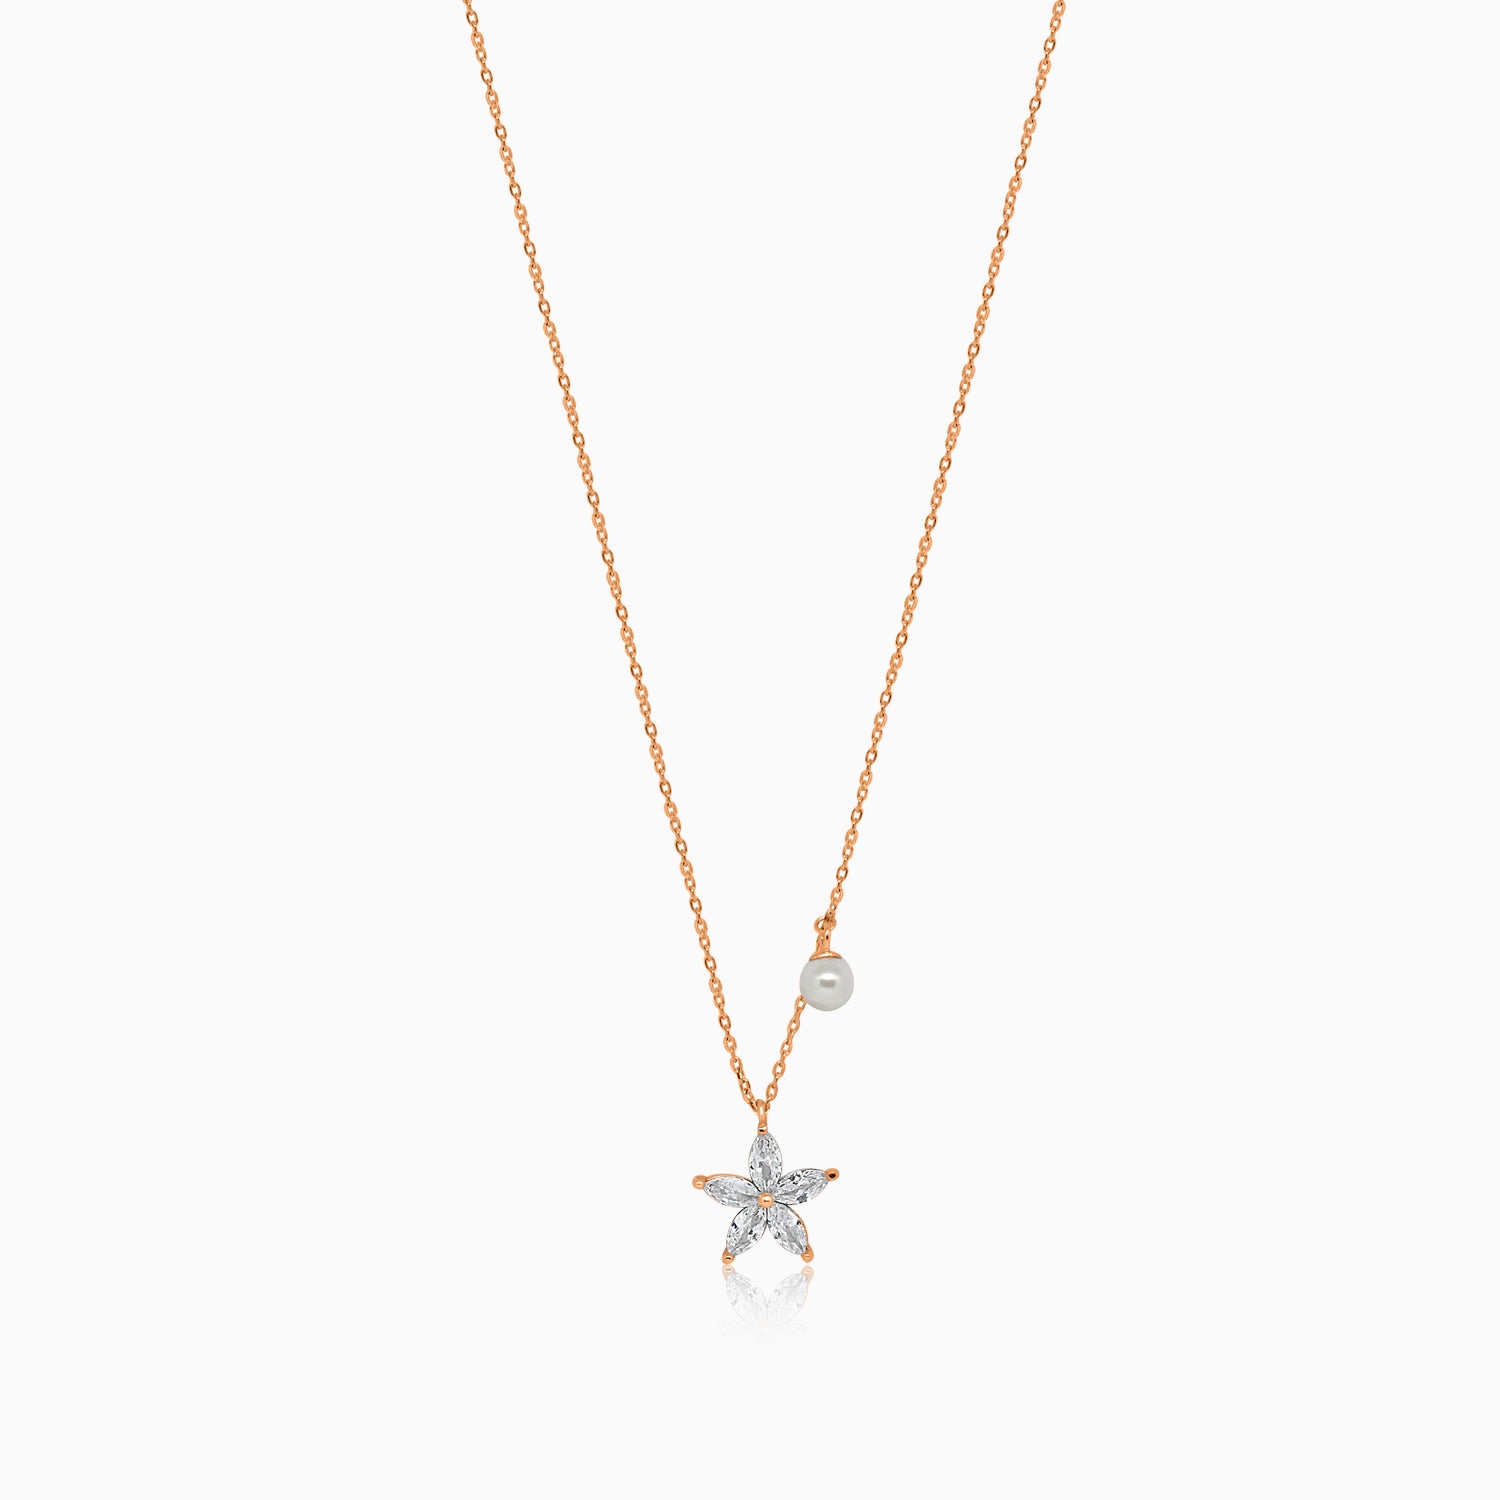 Silver Rose gold Sparkling Flower and Pearl Necklace